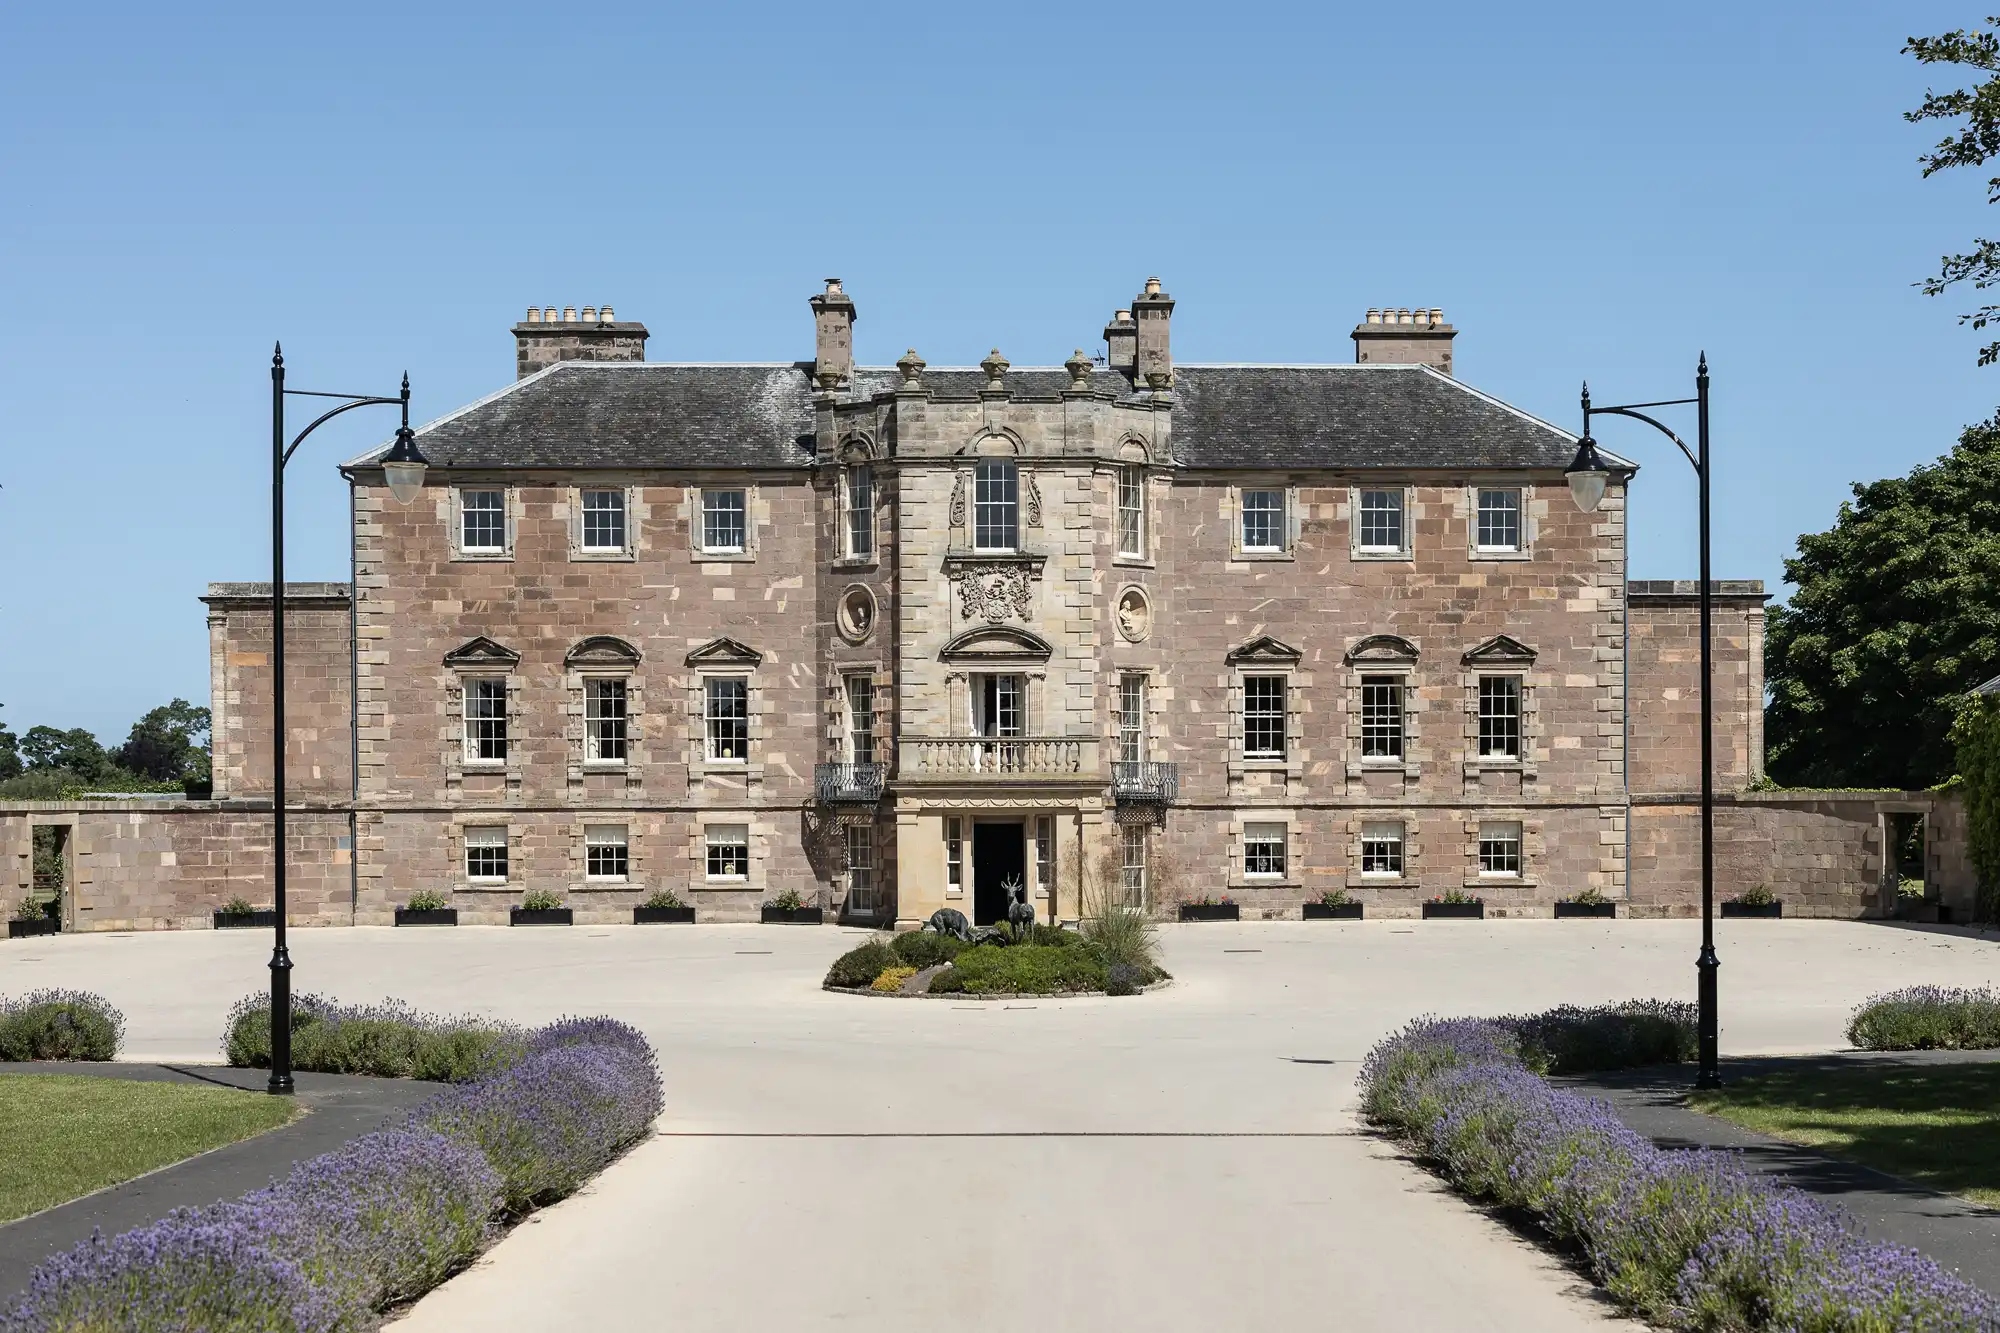 Front view of a grand, symmetrical stone mansion with a central entrance, flanked by lush lavender bushes and ornate lamp posts, under a clear blue sky.